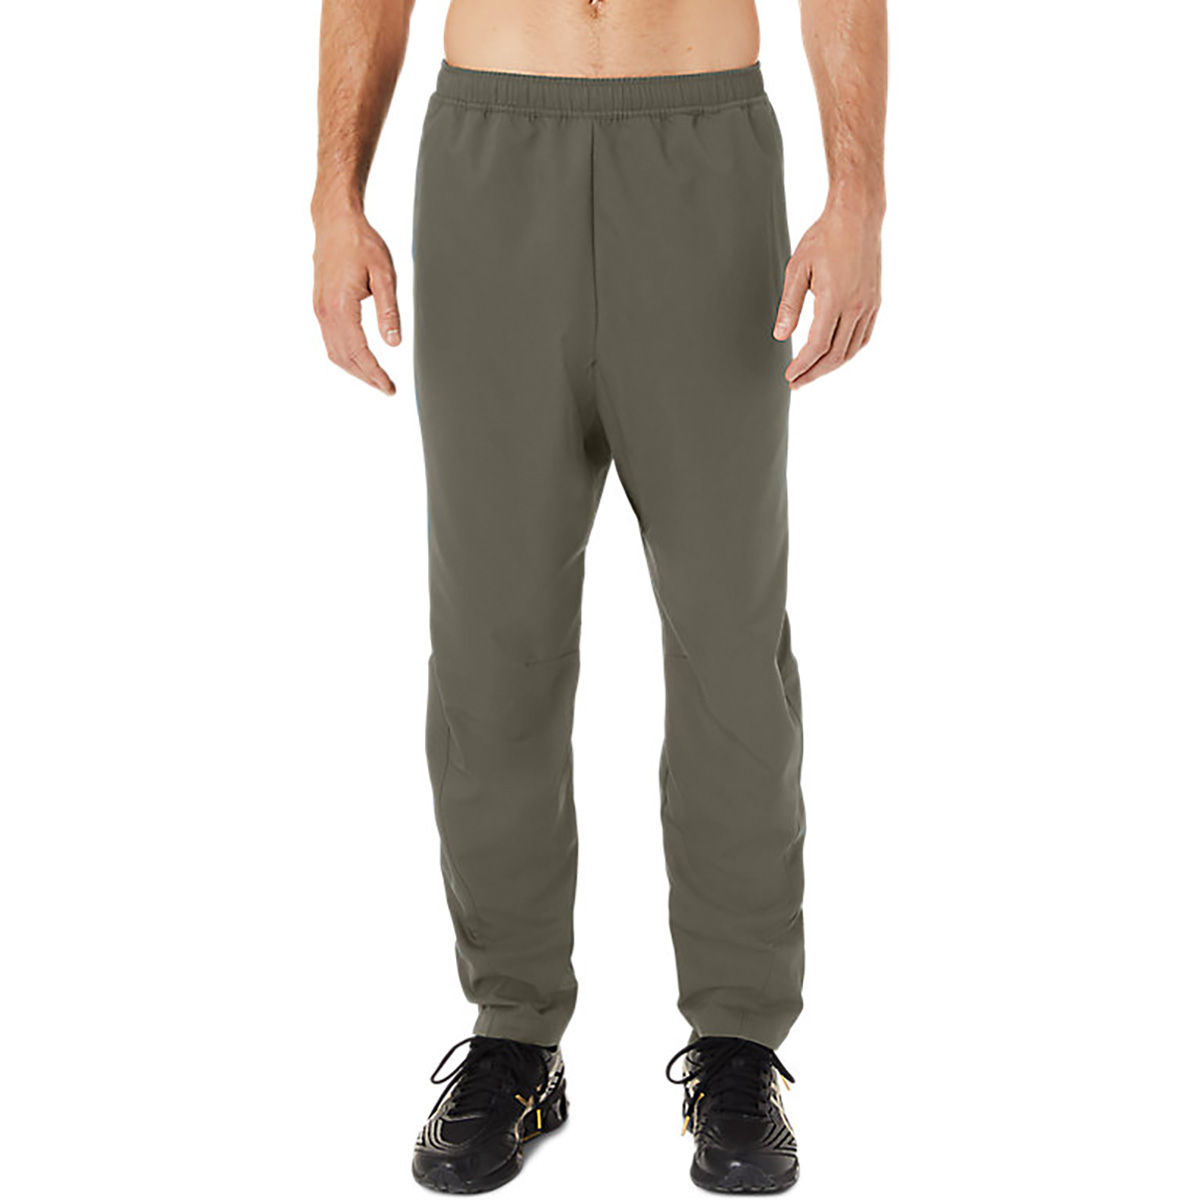 Asics Navy Blue Track Pants - Buy Asics Navy Blue Track Pants online in  India